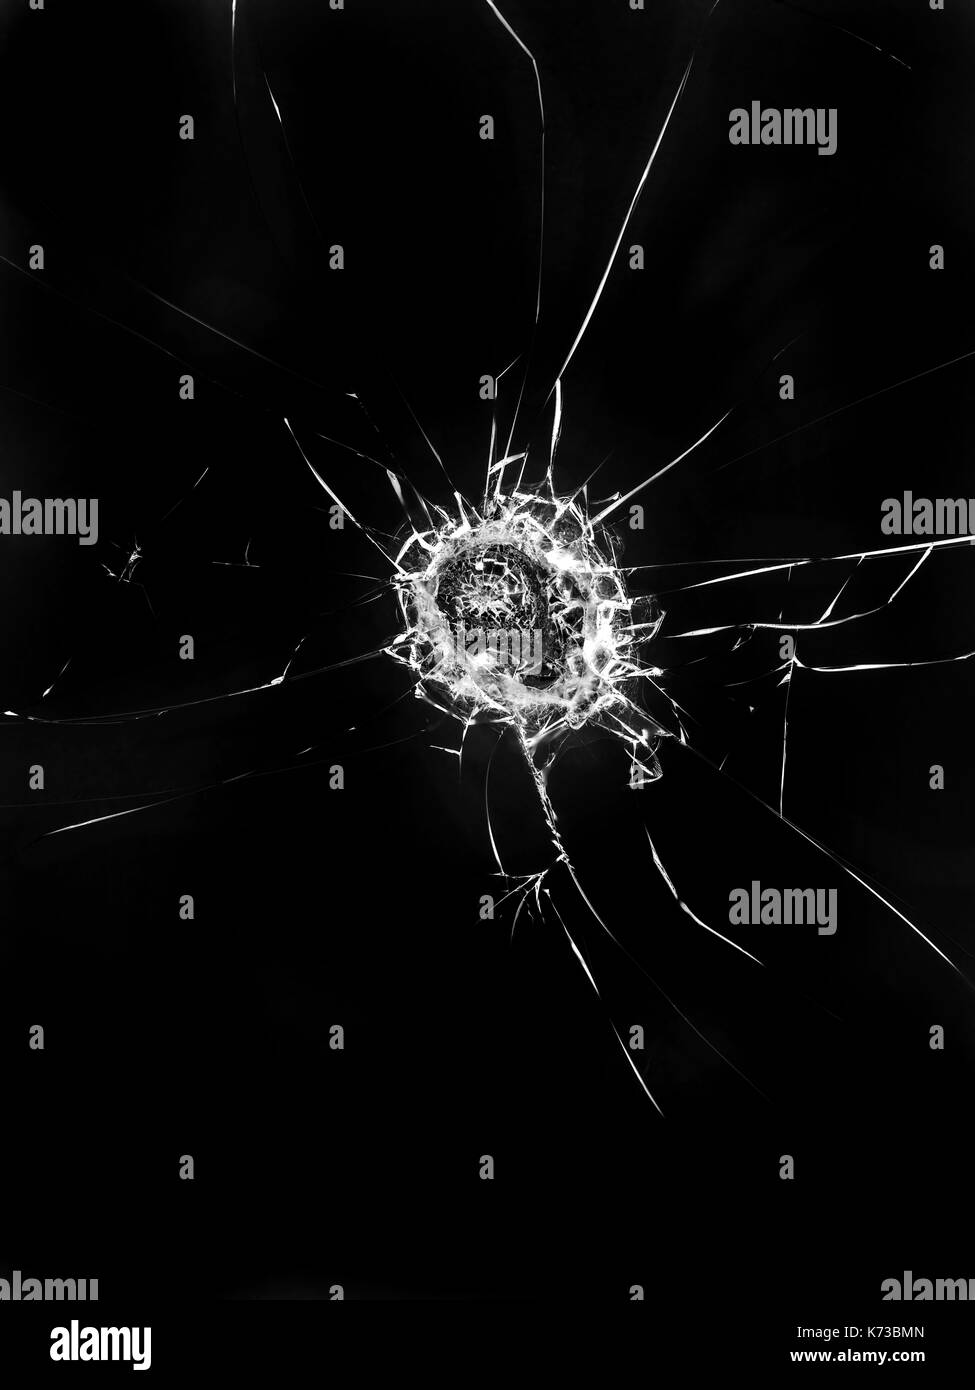 Broken glass texture. Isolated realistic cracked glass effect, concept element. Stock Photo